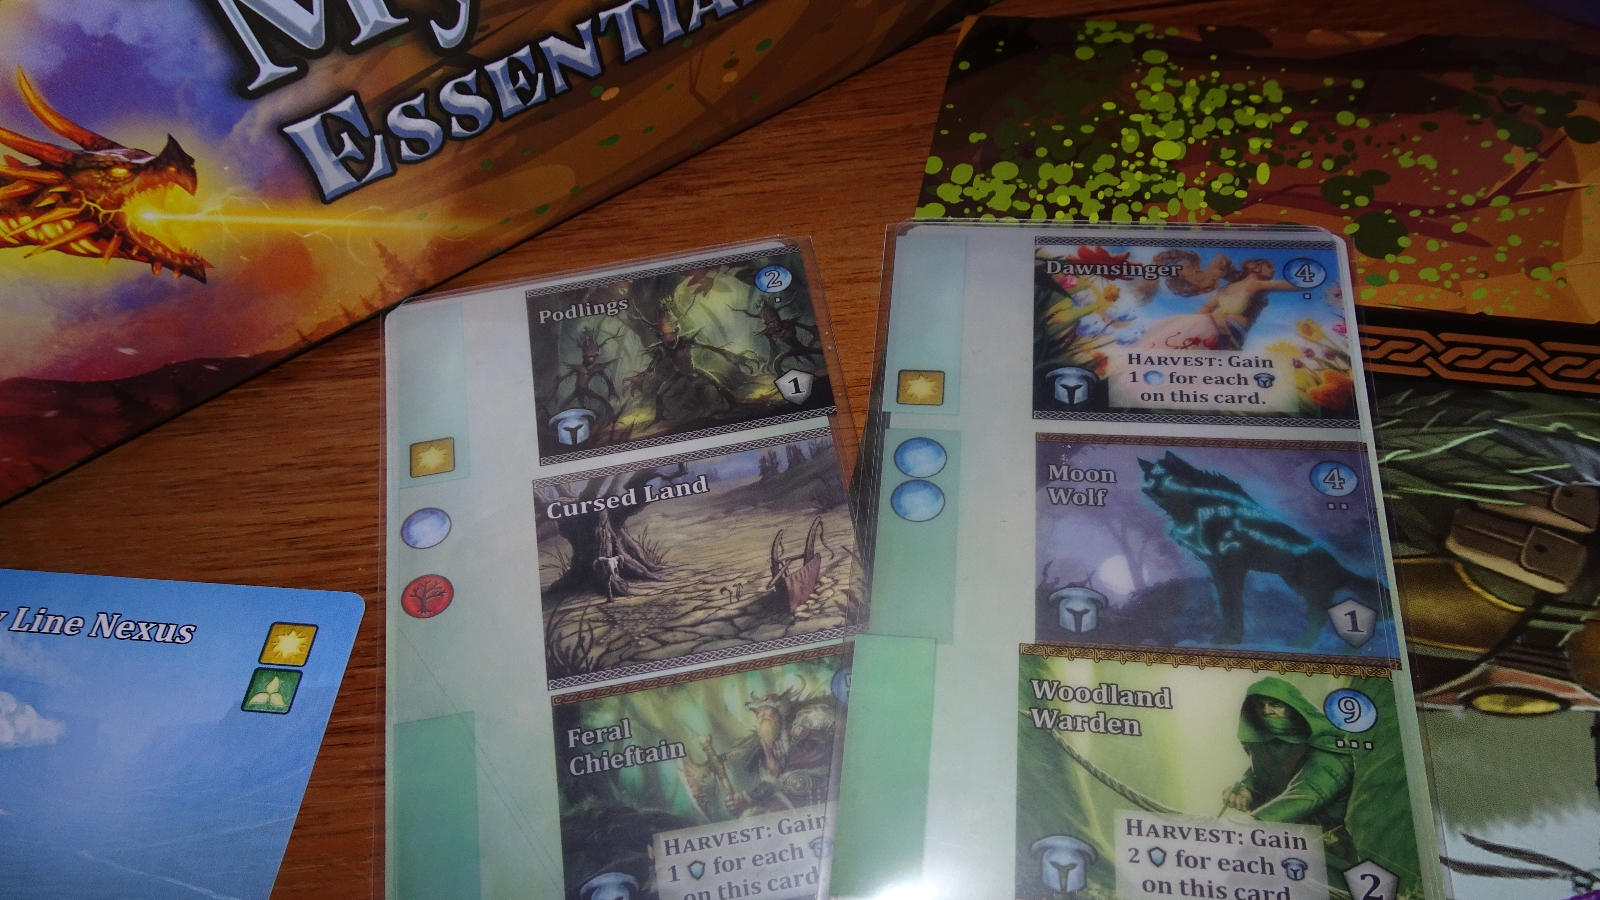  Alderac Entertainment Group (AEG) Mystic Vale: Essential  Edition - Base Game and Expansions, Complete Set, Card-Crafting, Deck  Building, 2-4 Players, Ages 14+, 45 Min Play Time : Video Games